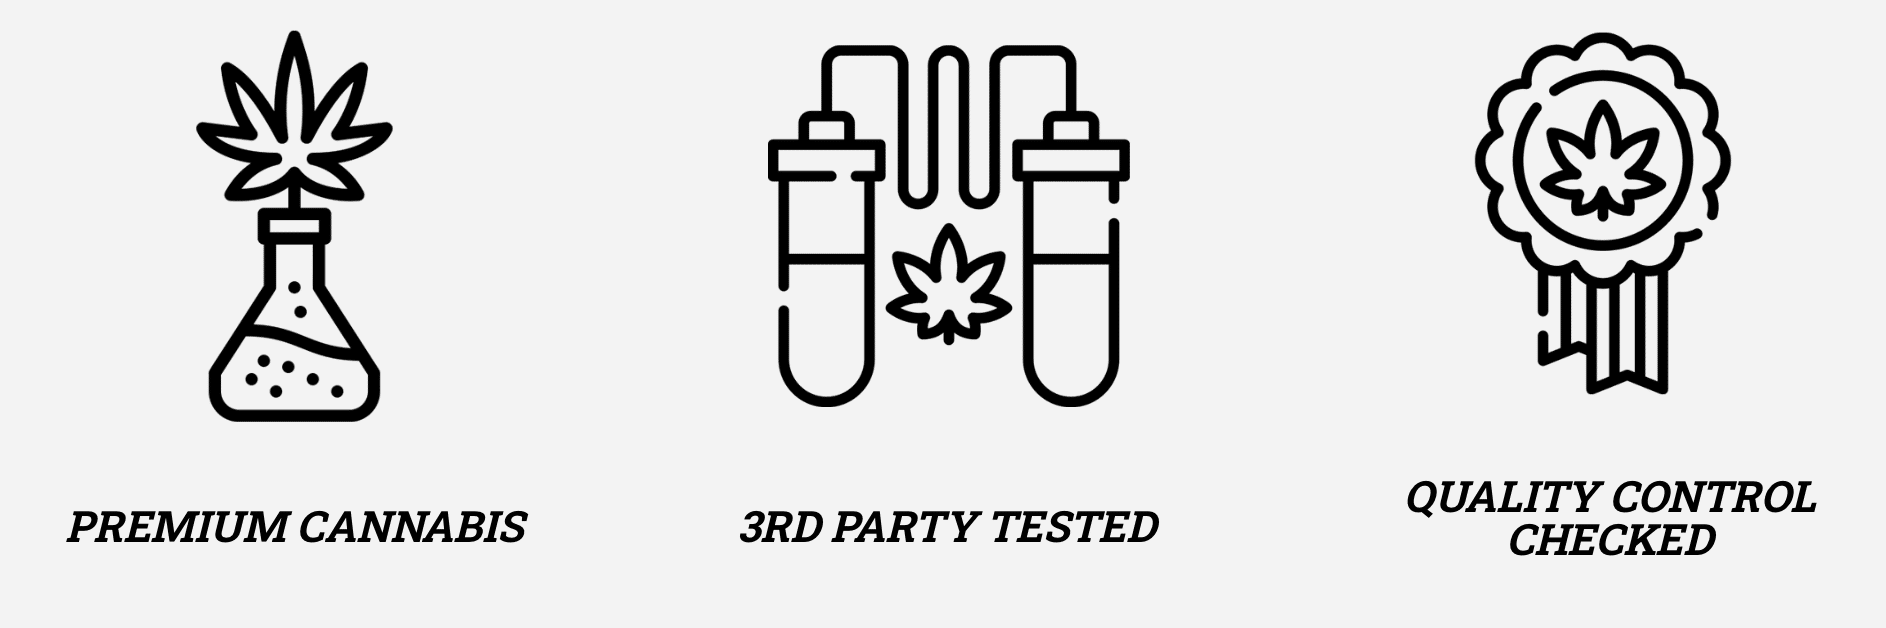 Premium Cannabis, 3rd Party Tested, and Quality Control Checked